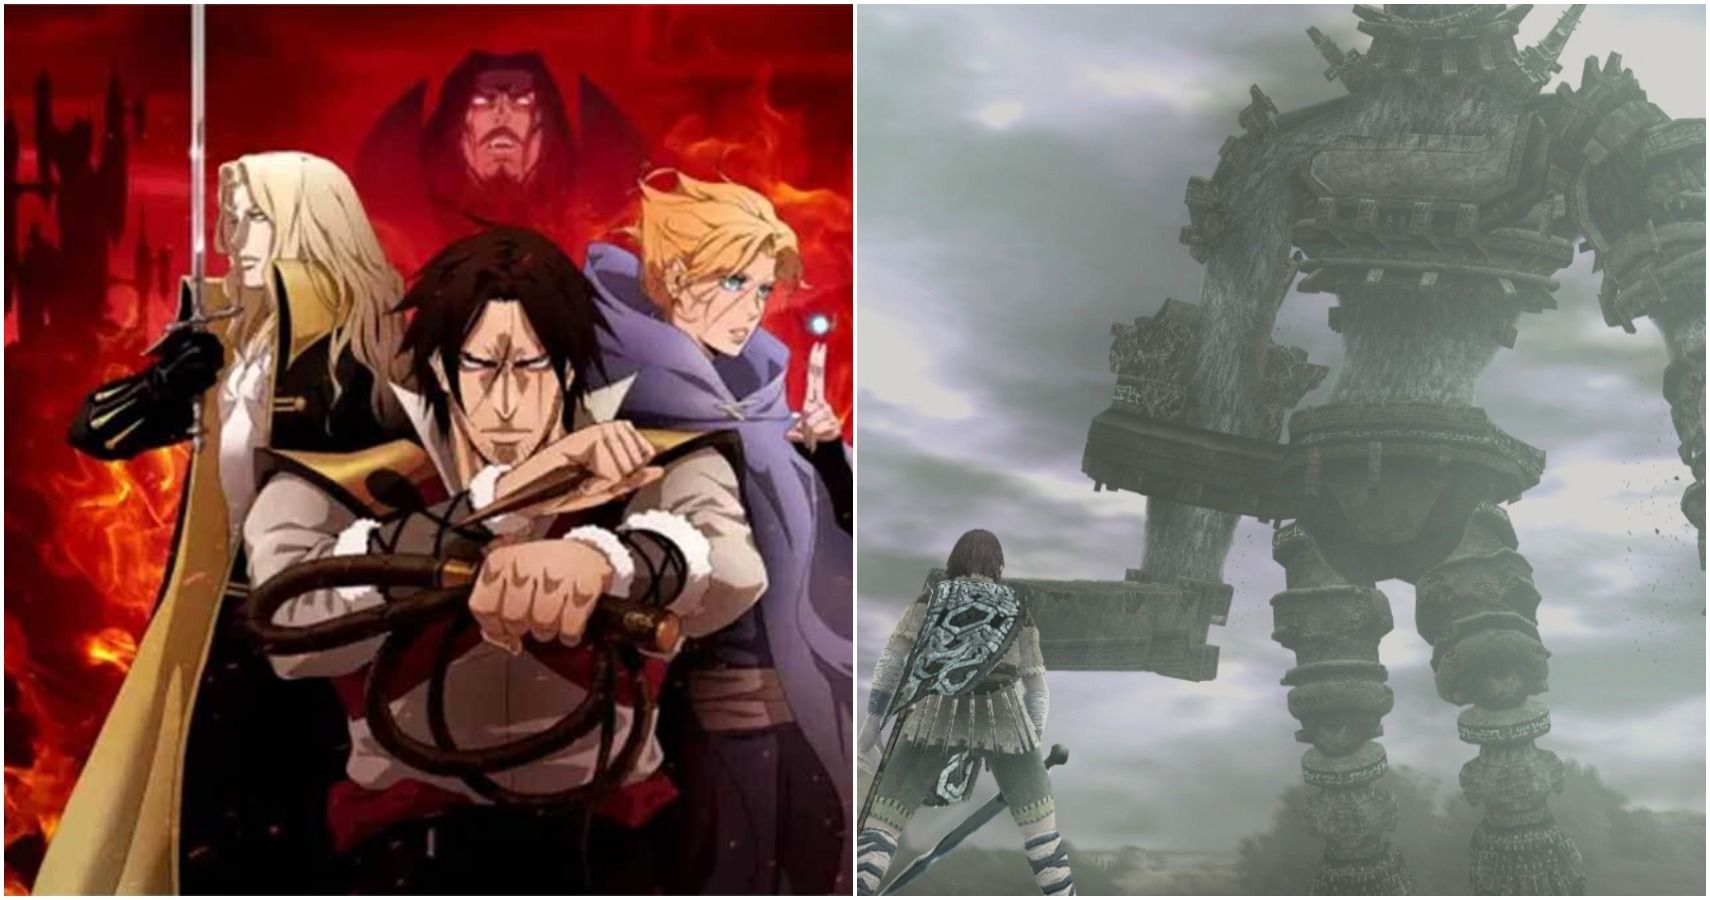 10 Video Games That Should Become Anime Series Like Netflixs Castlevania